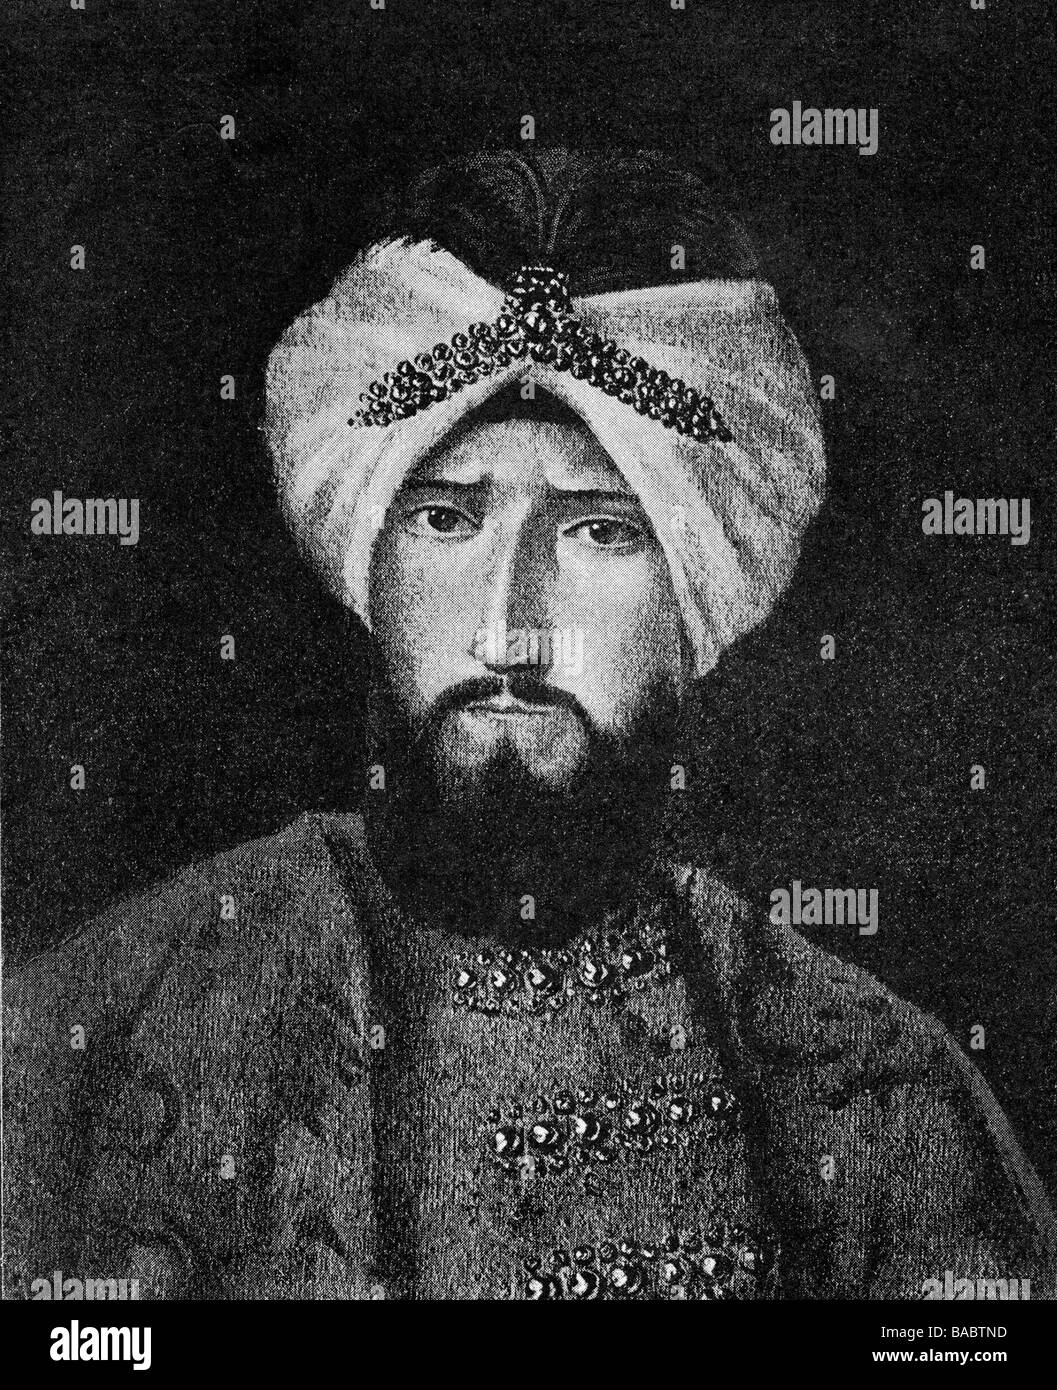 Ahmad III, 1673 - 30.6.1736, Sultan of the Ottoman Empire 22.8.1703 - 1.10.1730, portrait, wood engraving after contemporary painting, Uffizi, Florence, Stock Photo